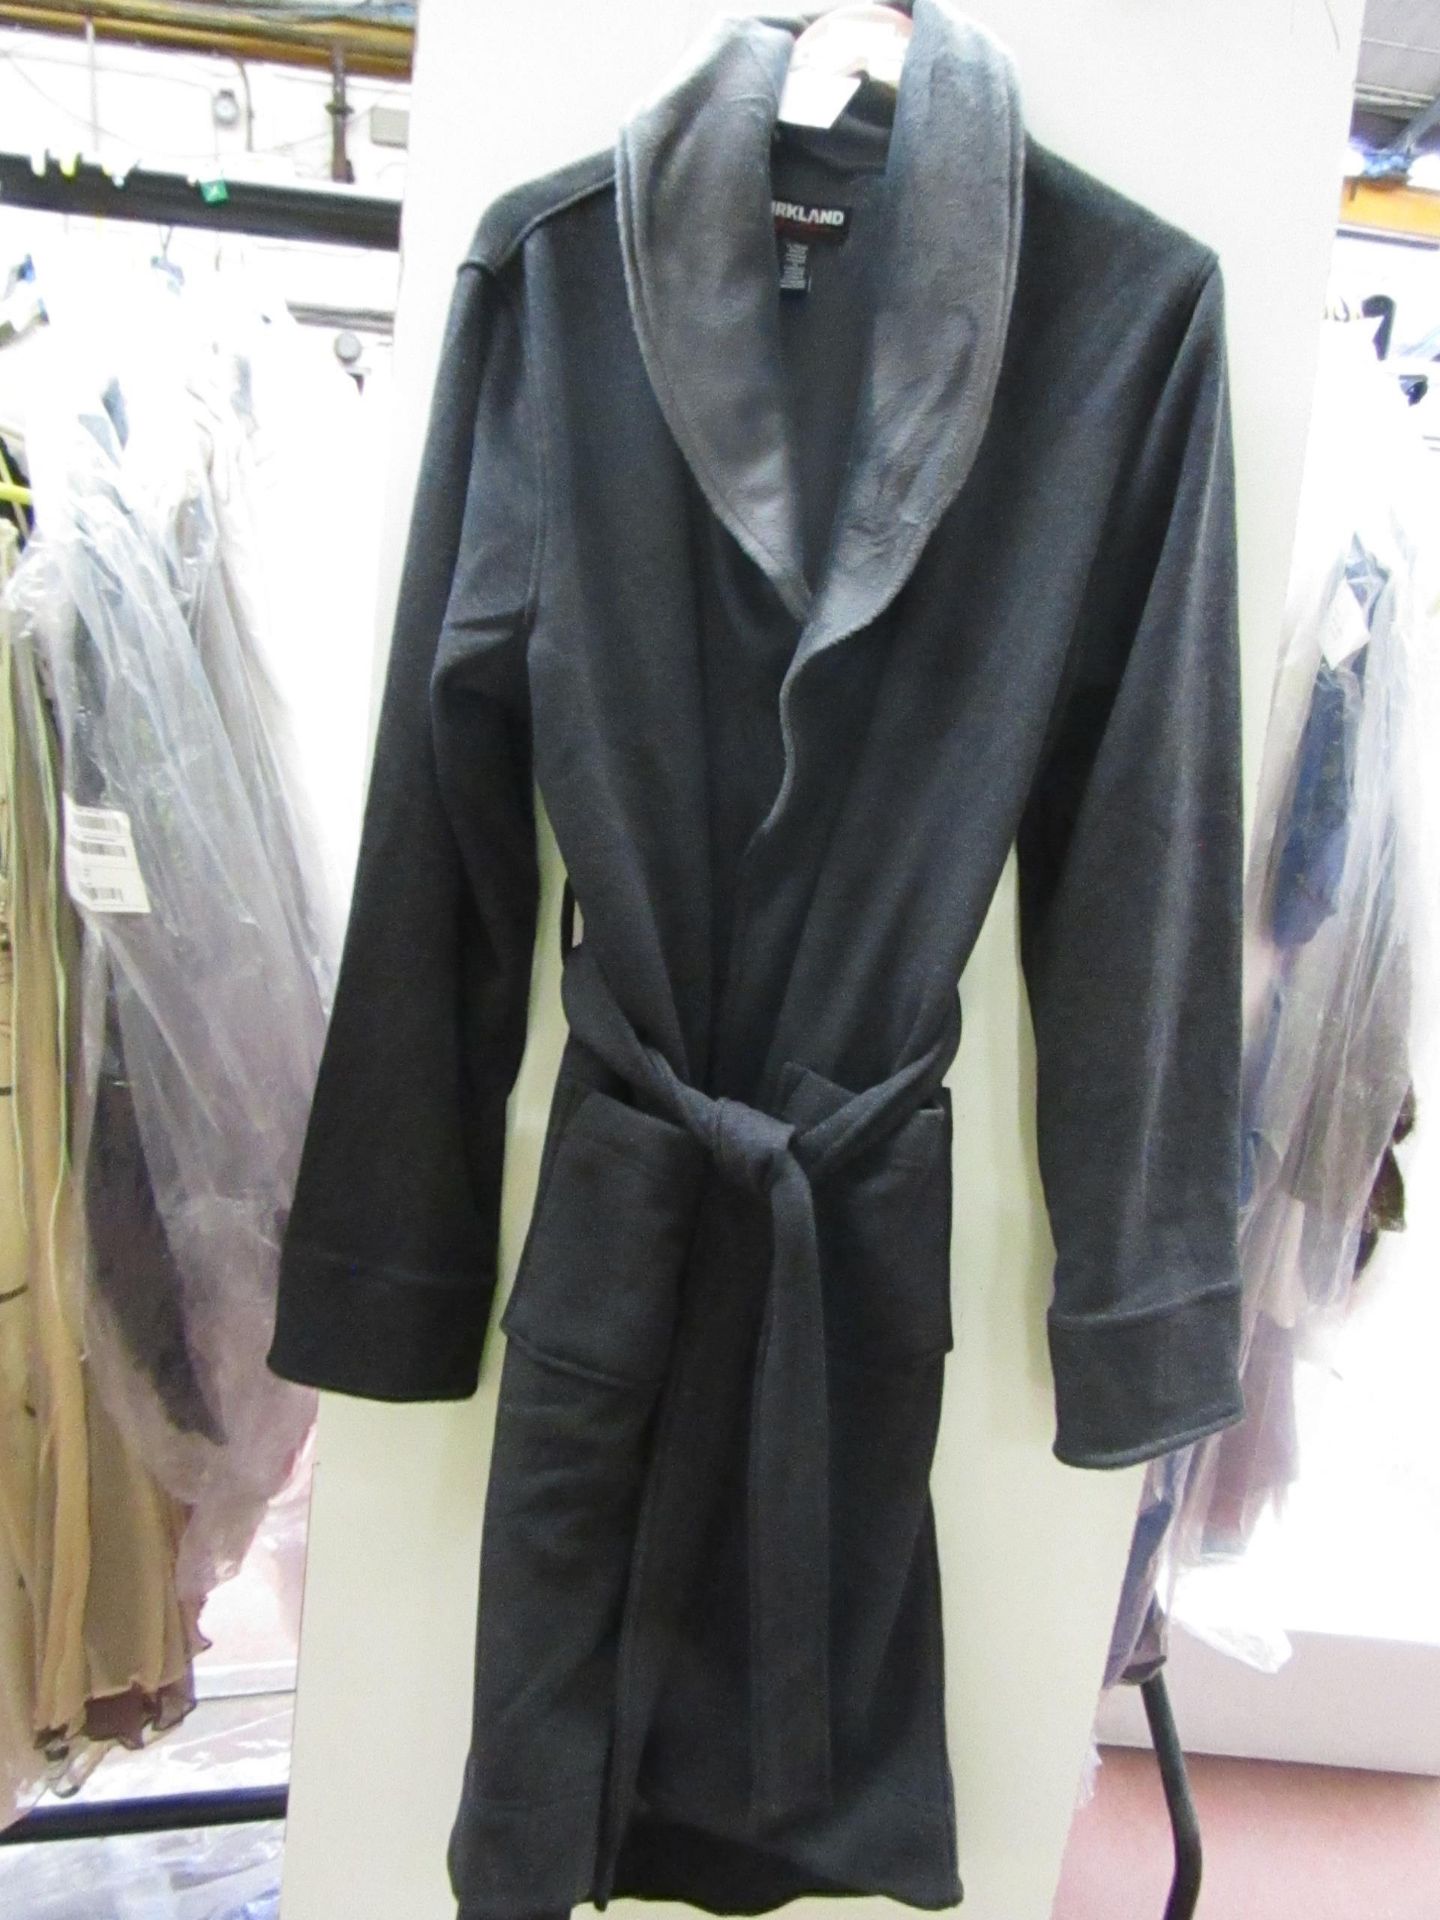 Kirkland Signature Ladies Fleecy Lined Robe Dark Grey Size M New With Tags